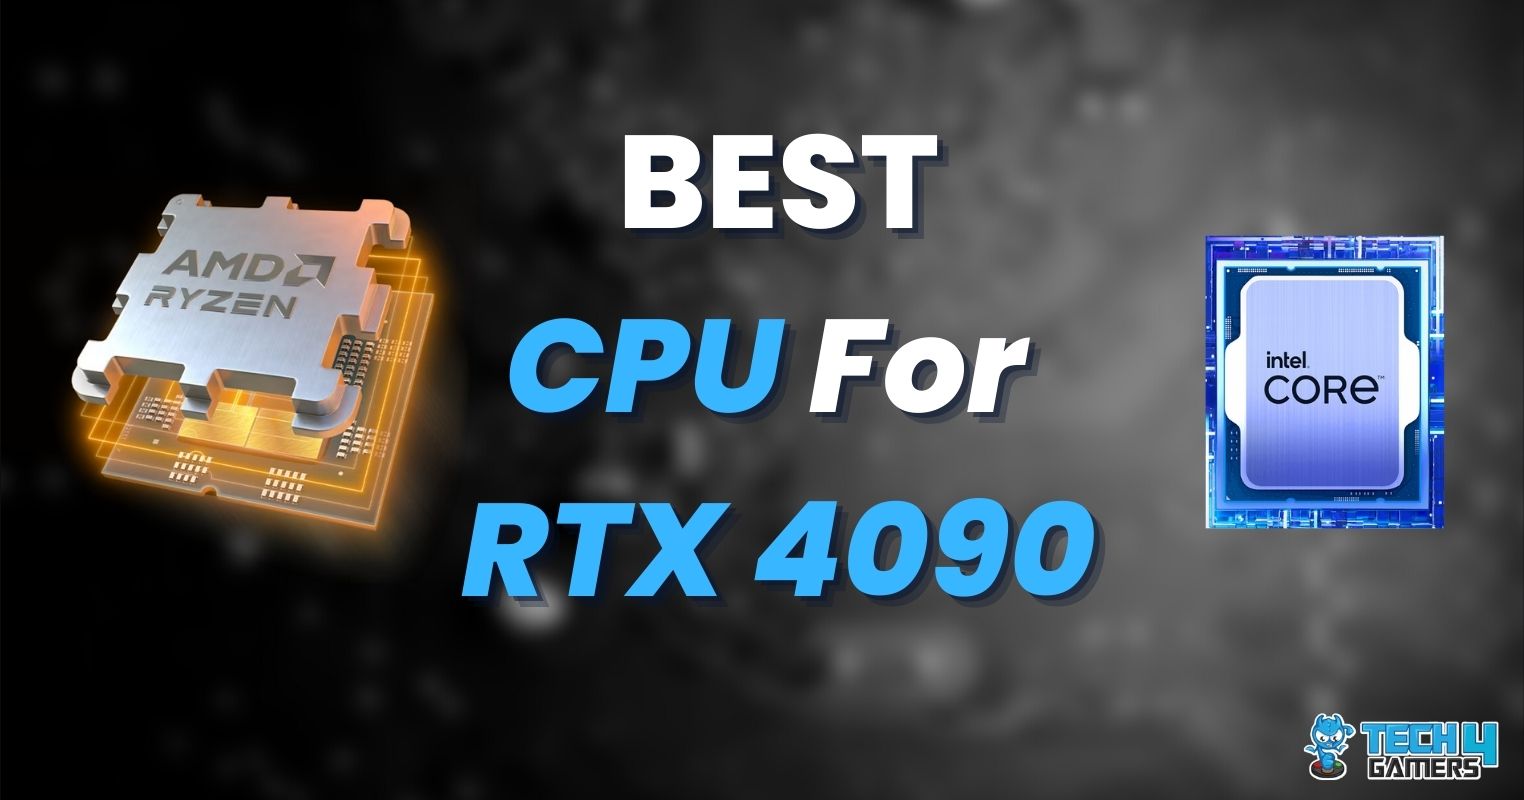 Intel 13th Gen i7 13700K CPU Review: A processor that's clearly punching  above its class